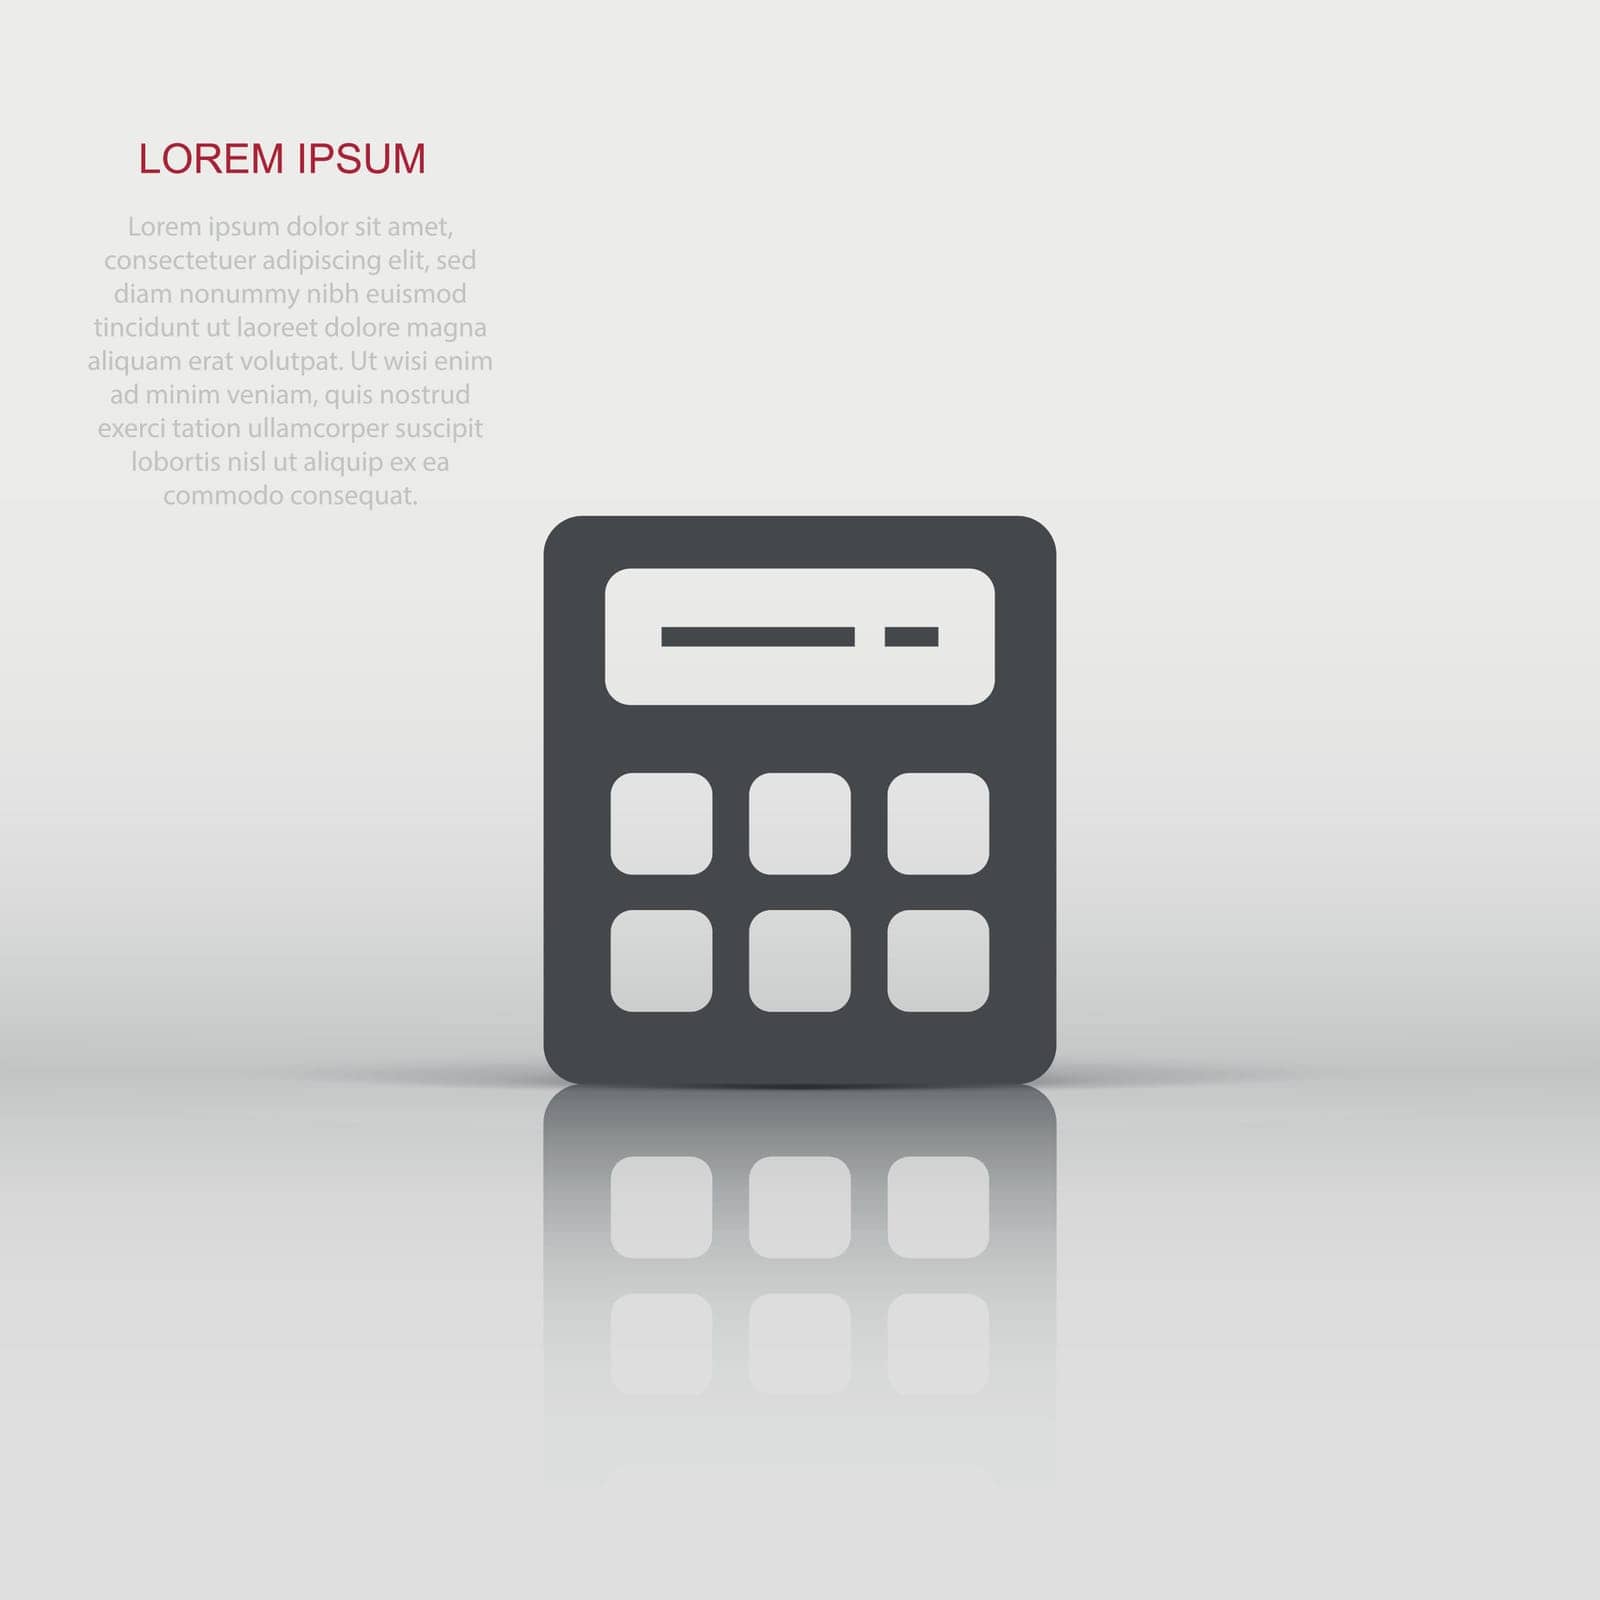 Calculator icon in flat style. Calculate vector illustration on white isolated background. Calculation business concept.